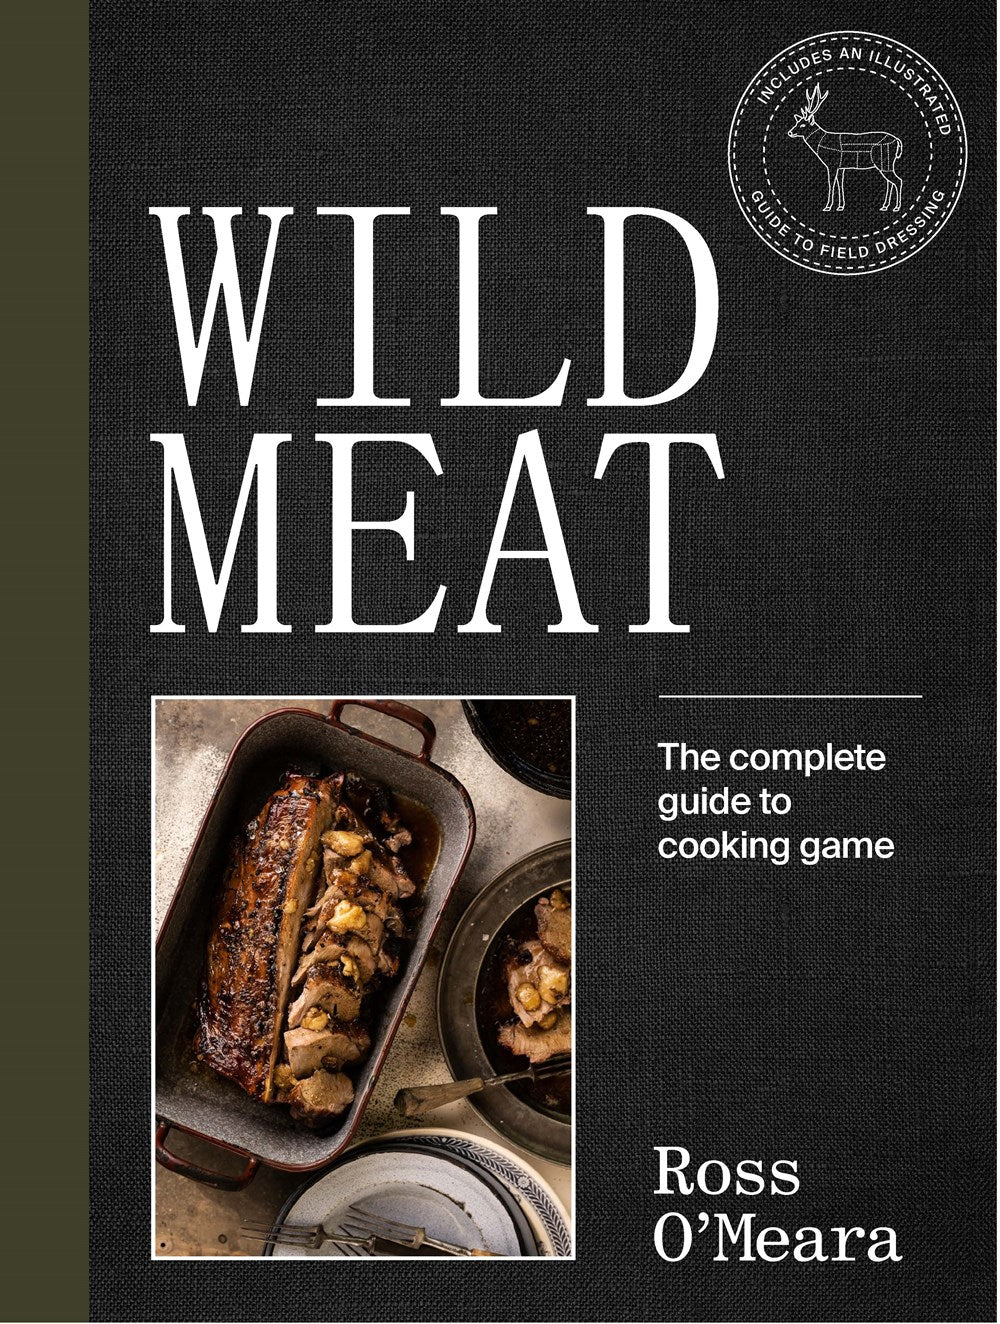 Wild Meat: From Field to Plate – Recipes from a Chef who Hunts (Ross O'Meara)